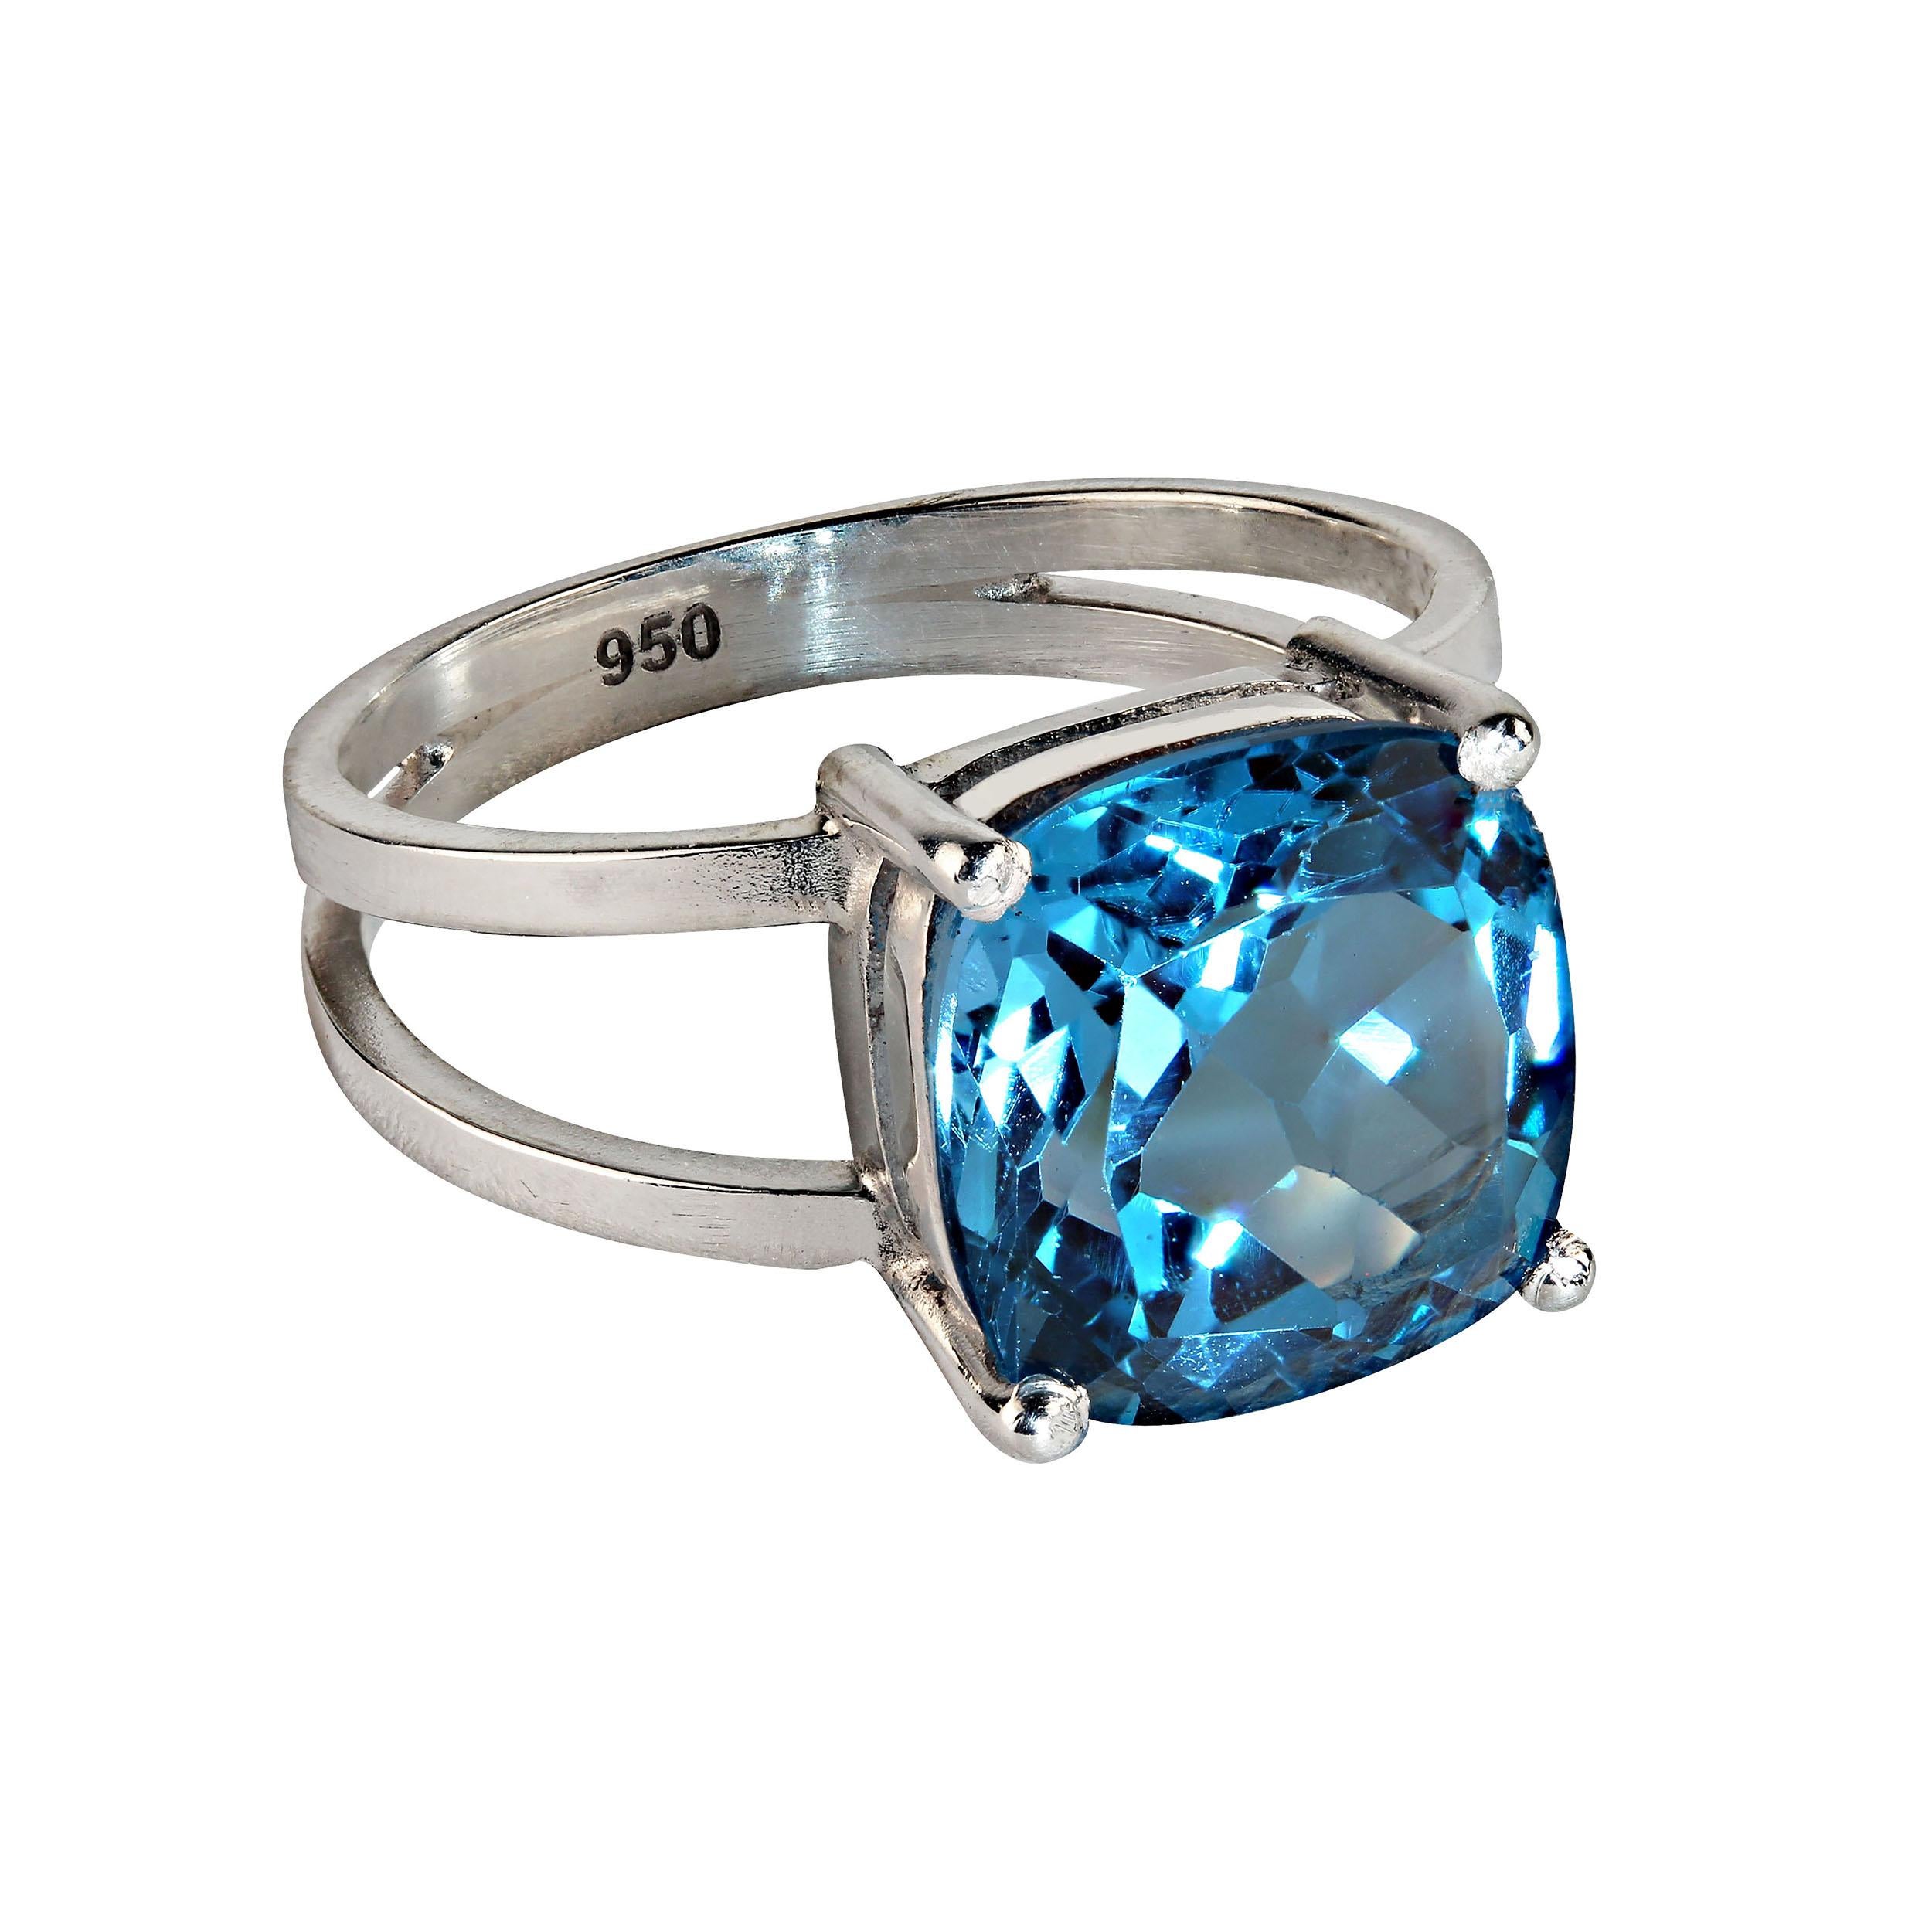 Artisan AJD Scintillating Antique Cushion Cut 6 Ct Swiss Blue Topaz and Sterling Silver 